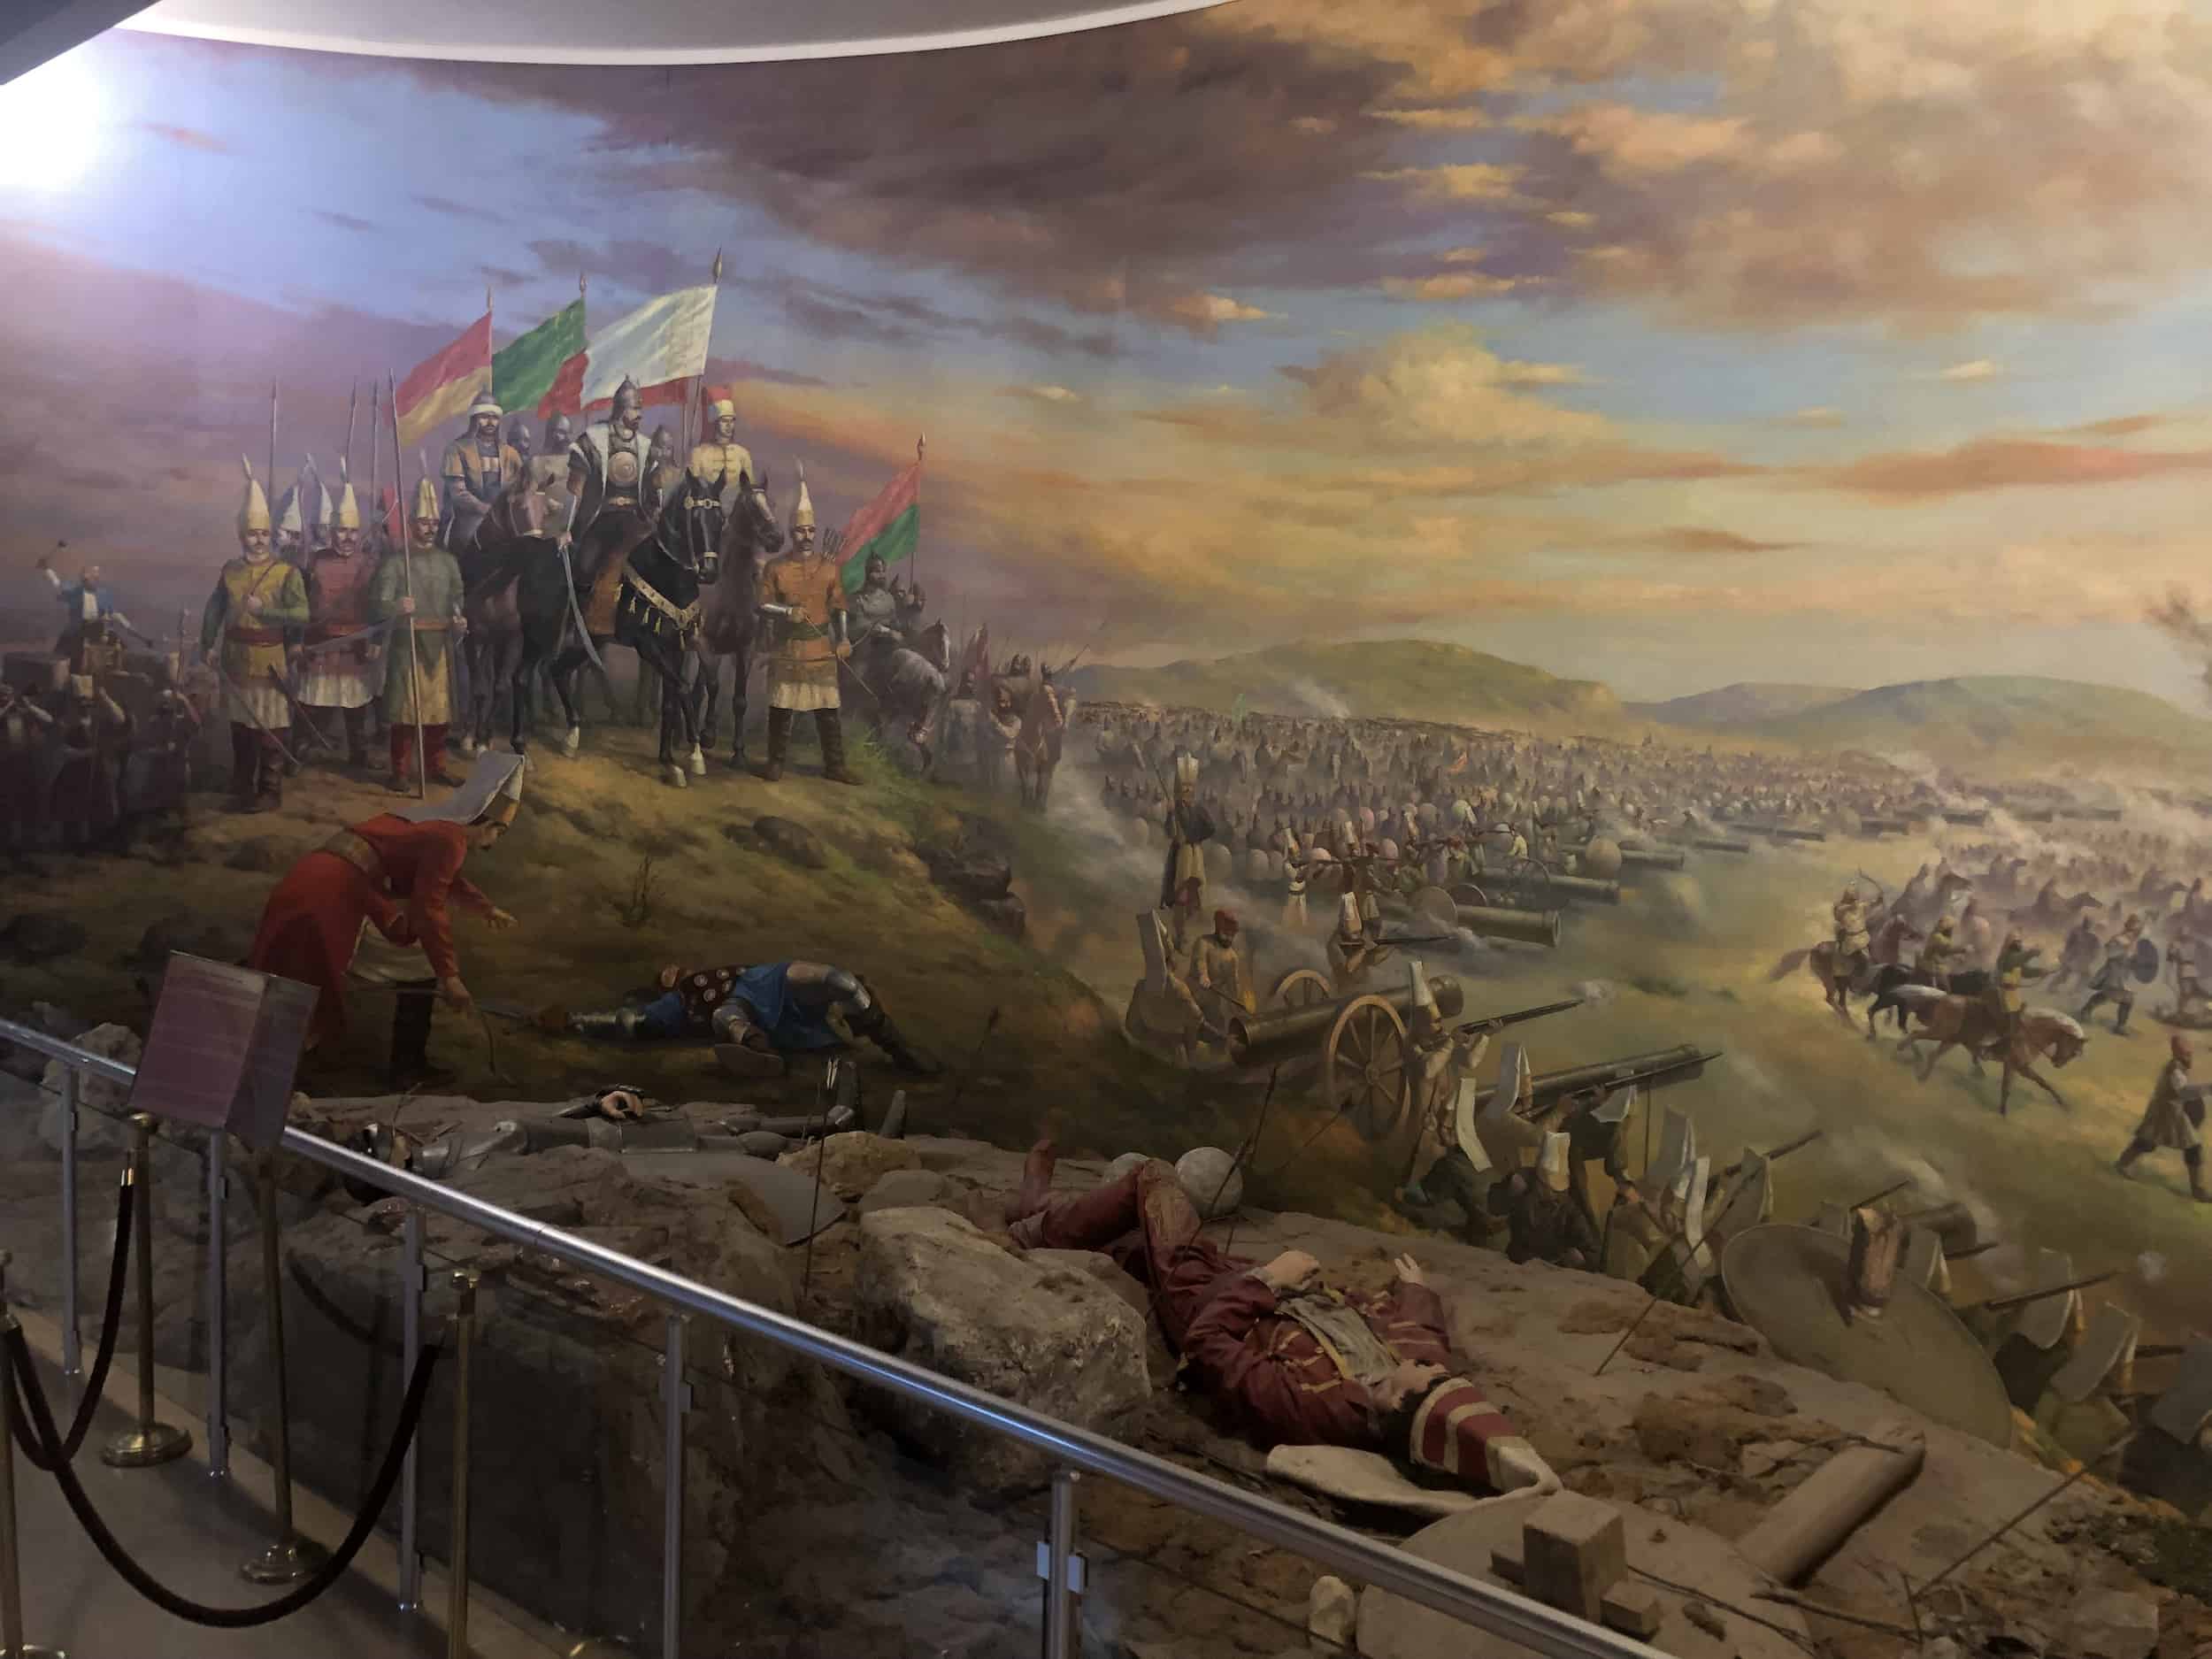 Diorama of the Battle of Mohács in the Ottoman Rising Period Hall at the Harbiye Military Museum in Istanbul, Turkey